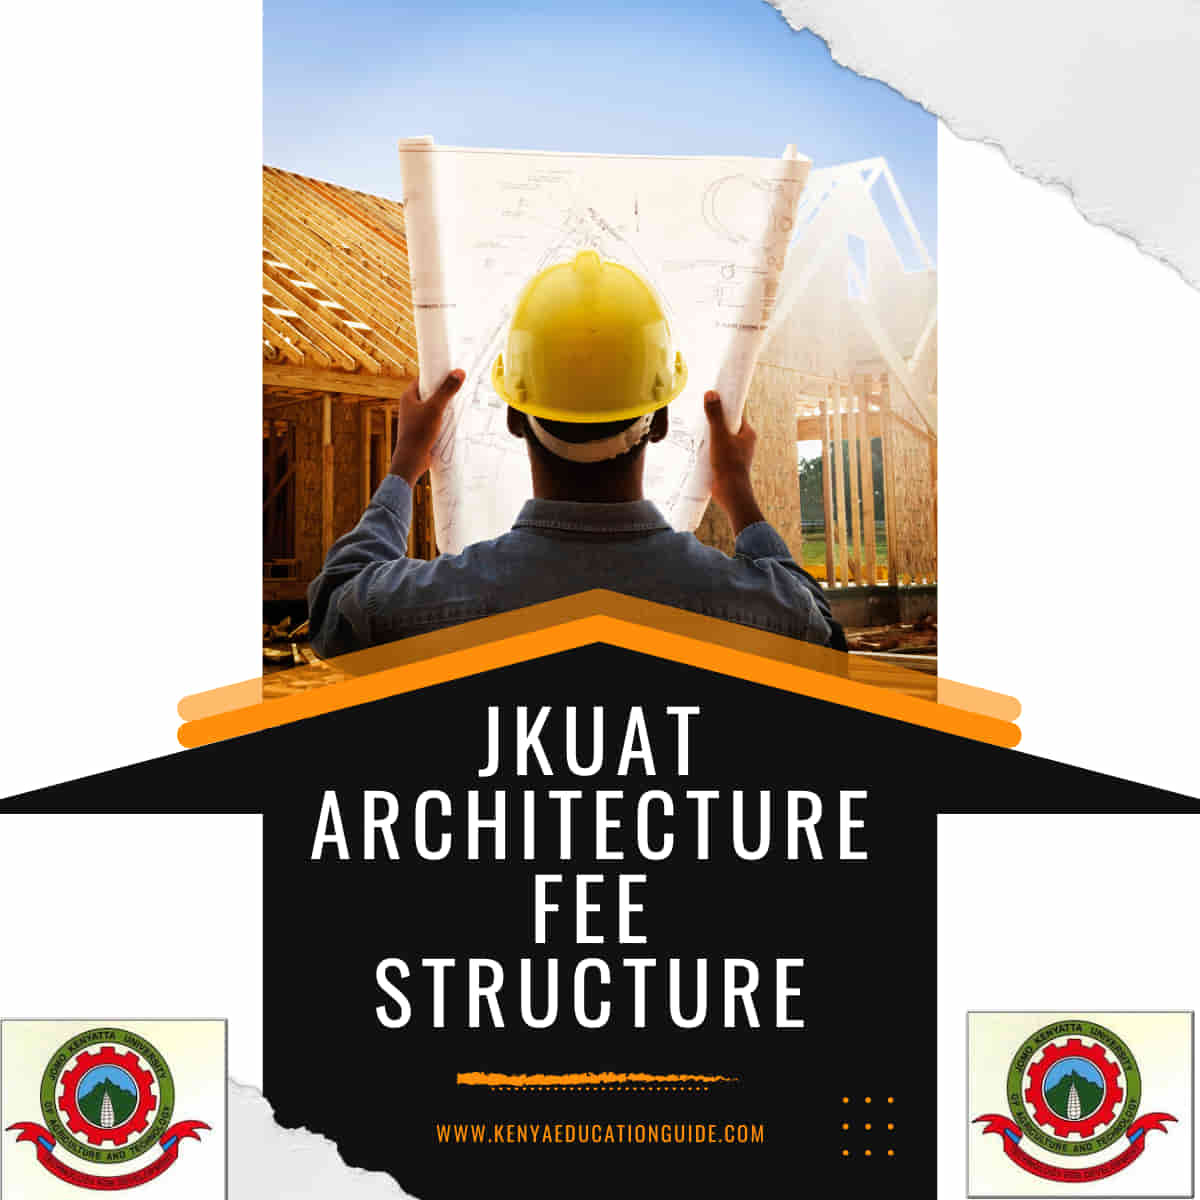 JKUAT architecture fee structure